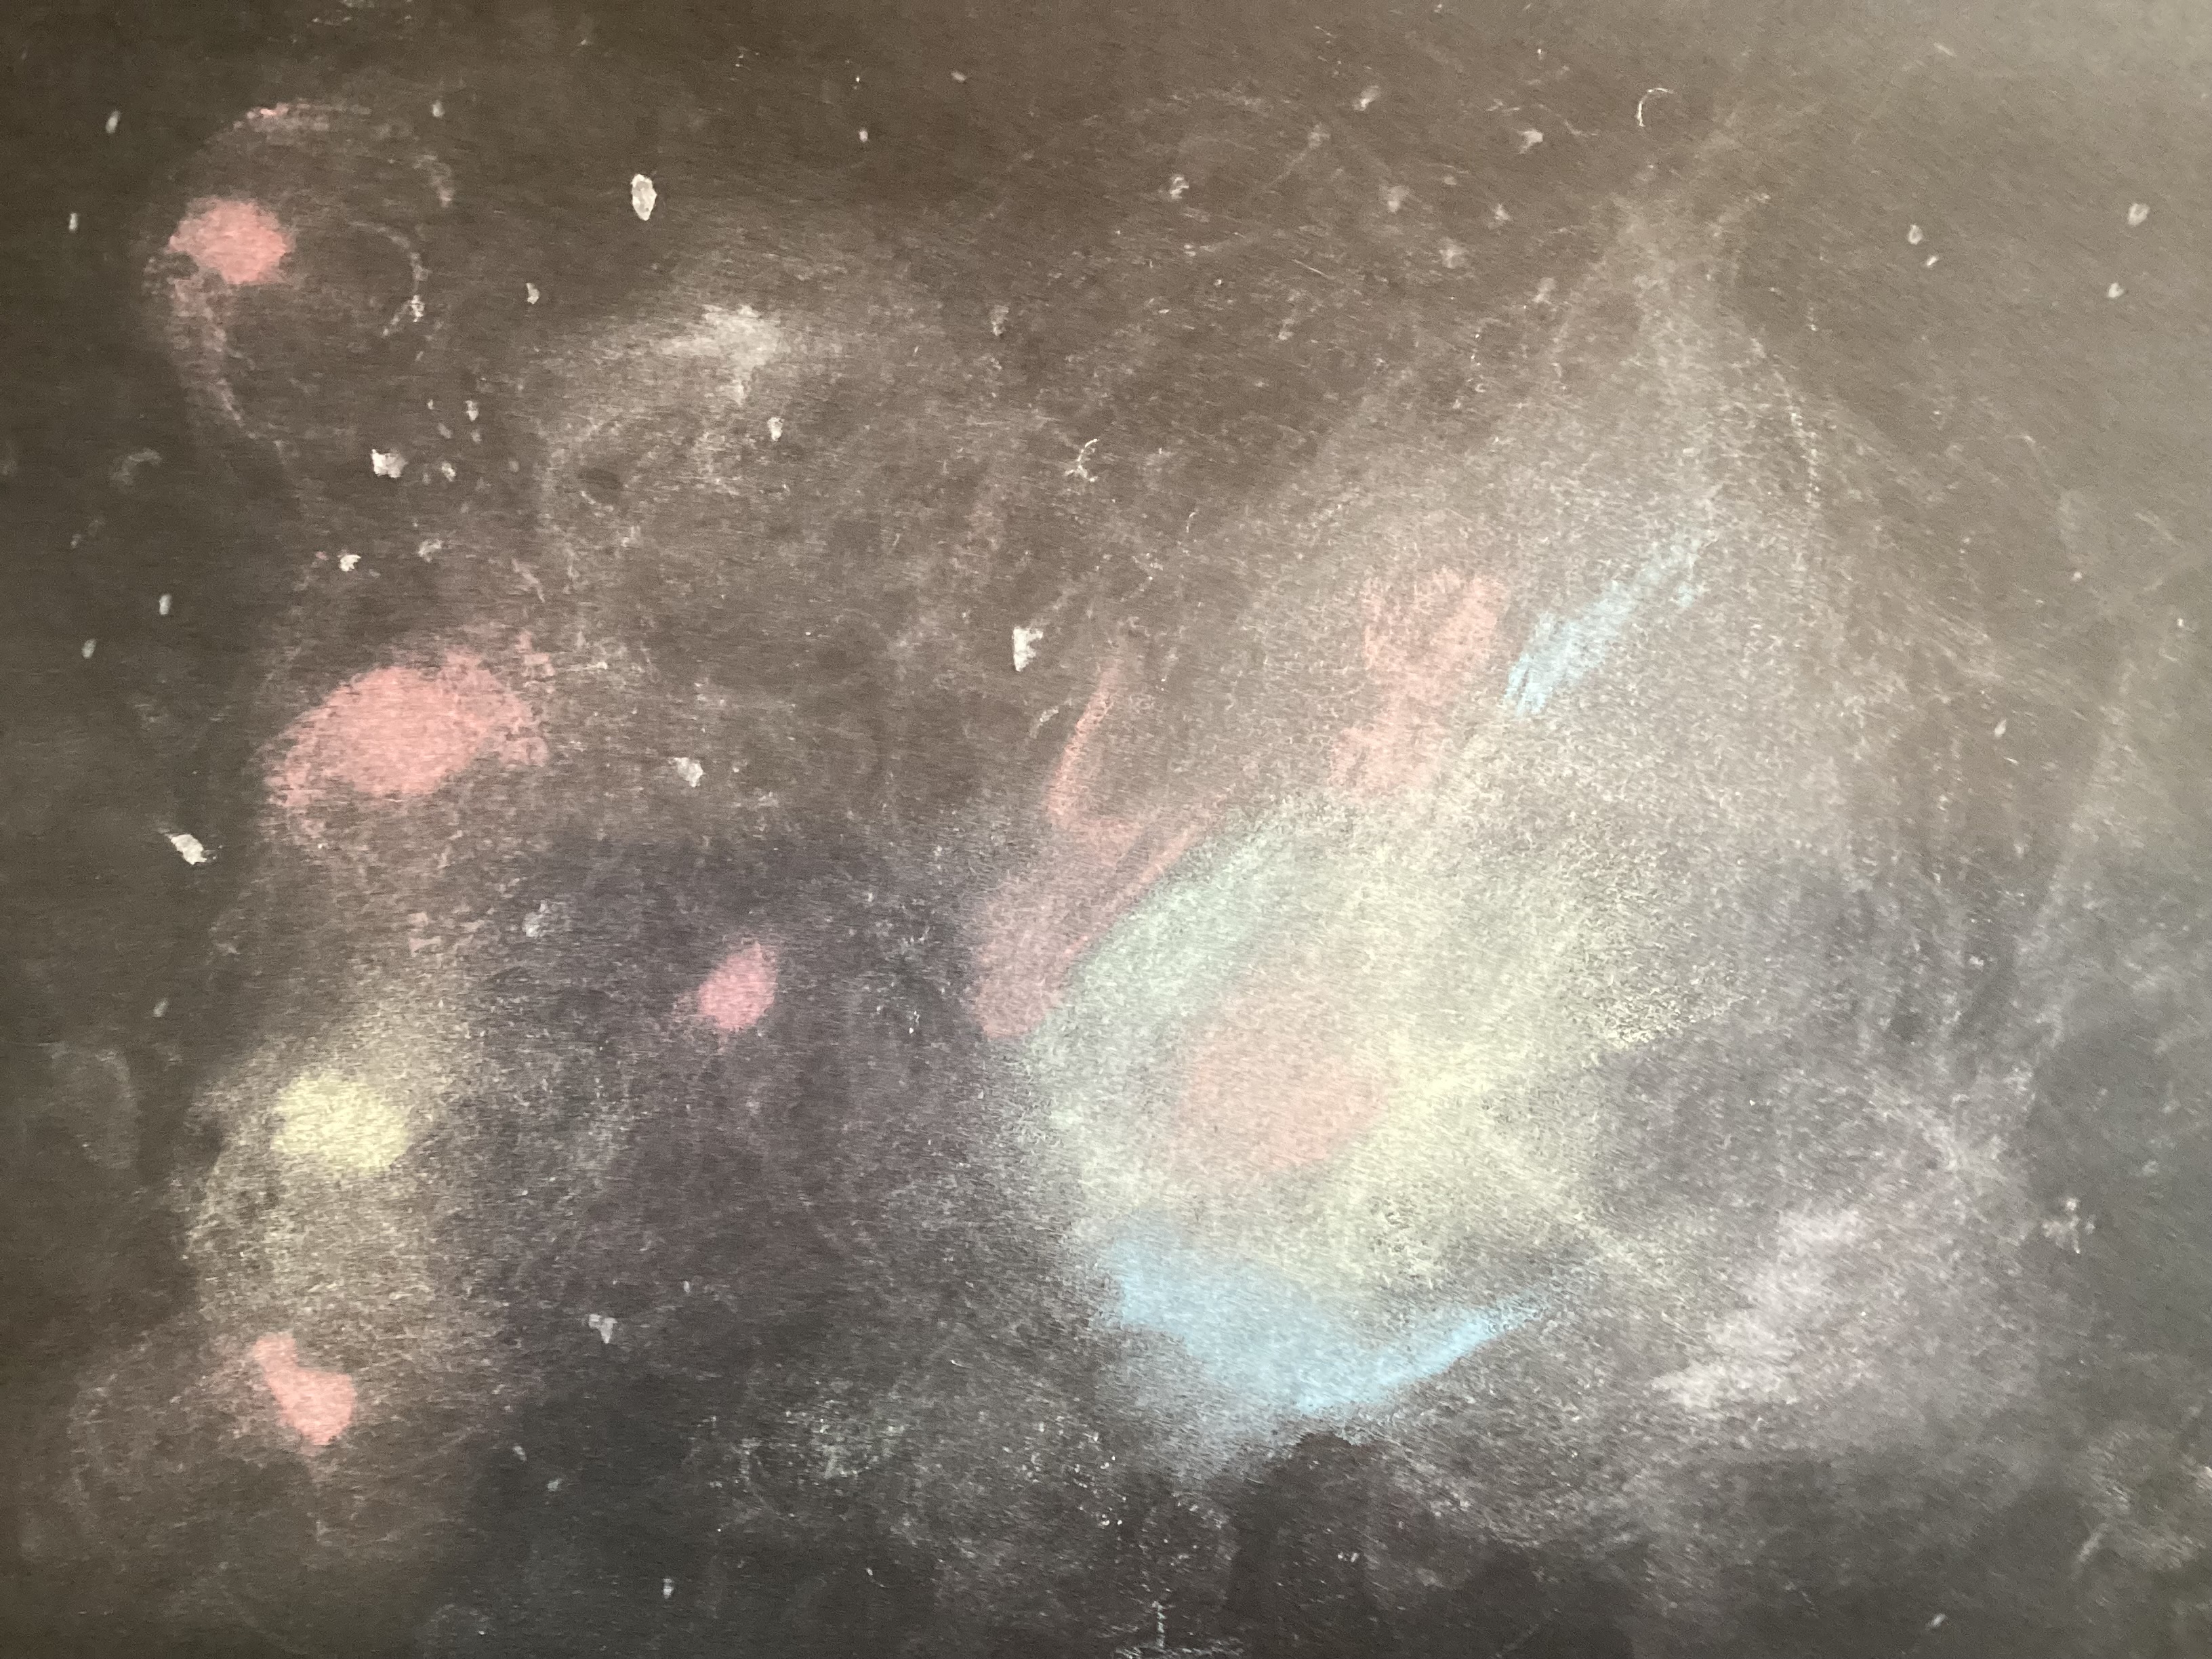 chalk smudges resembling a nebula in soft yellow, blue, and red on a black background